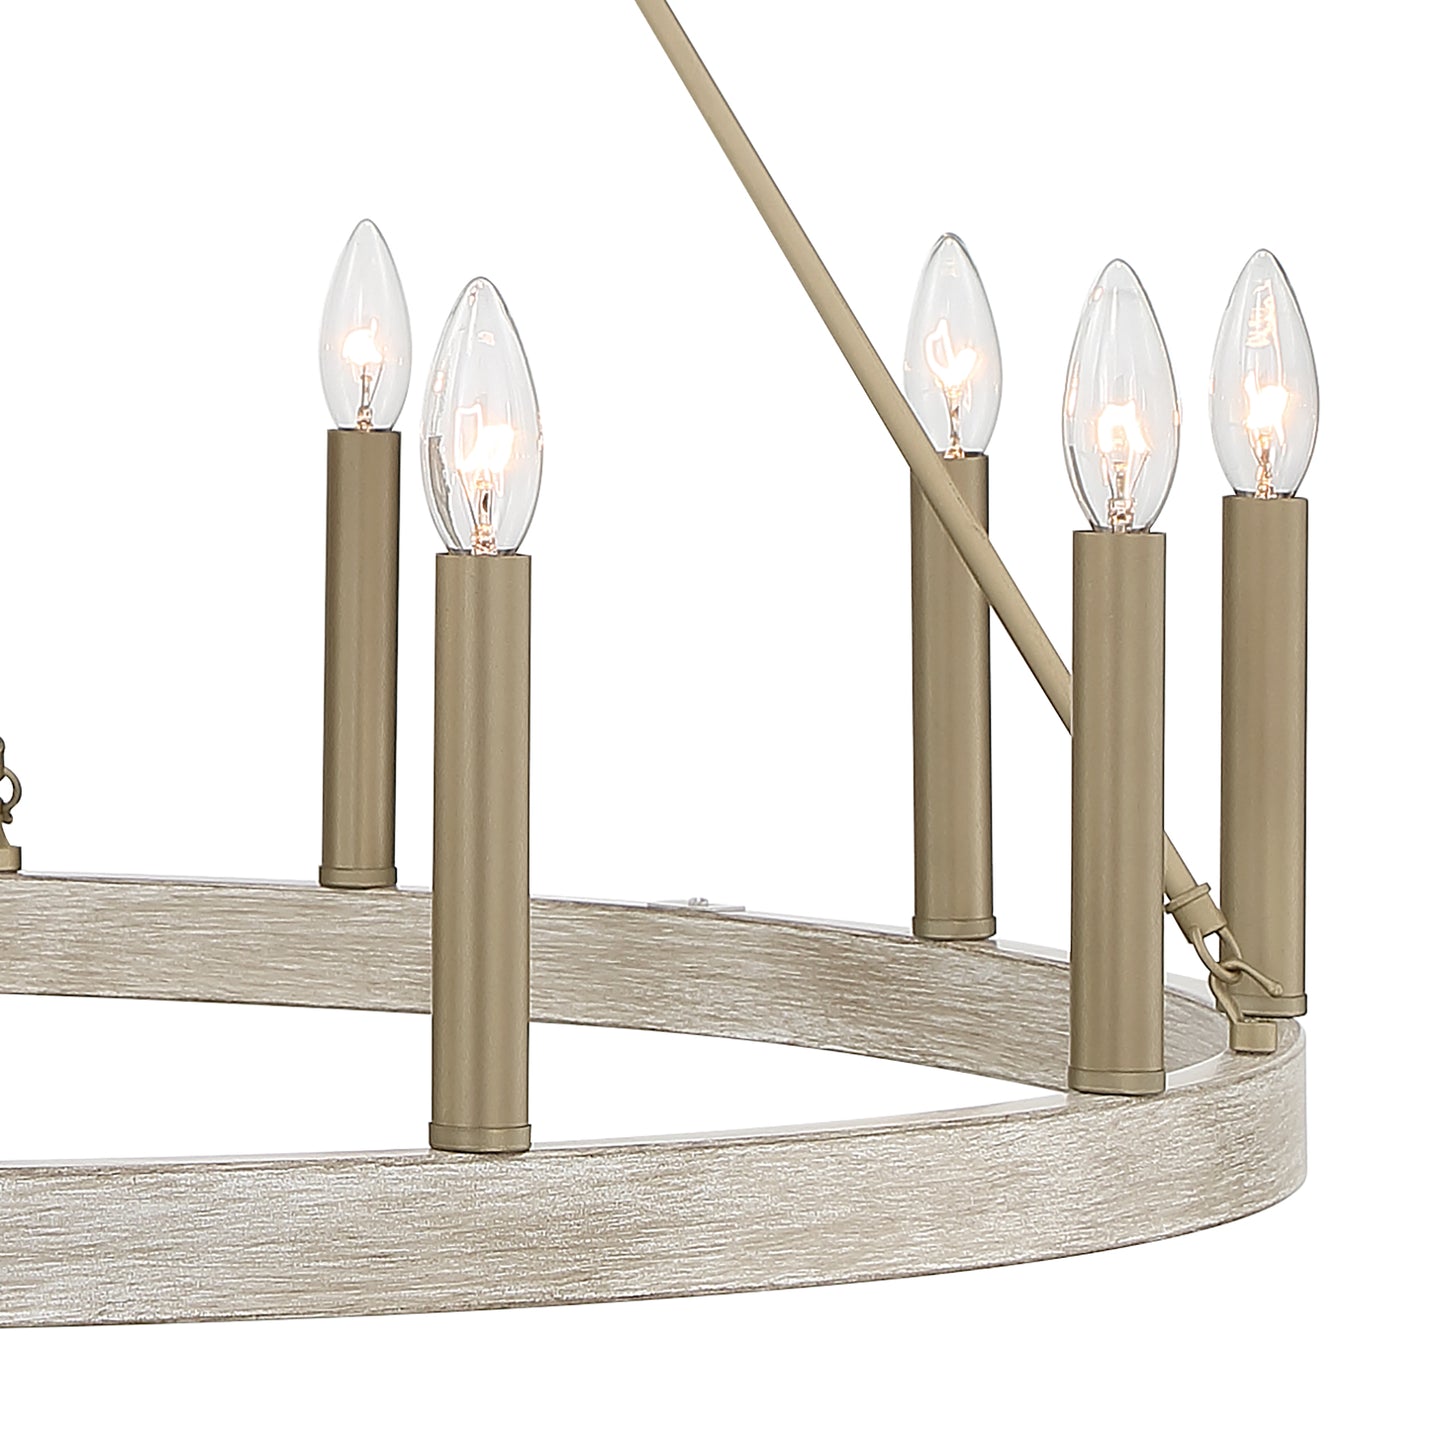 12-Light Candle Style Wagon Wheel Chandelier UL Listed